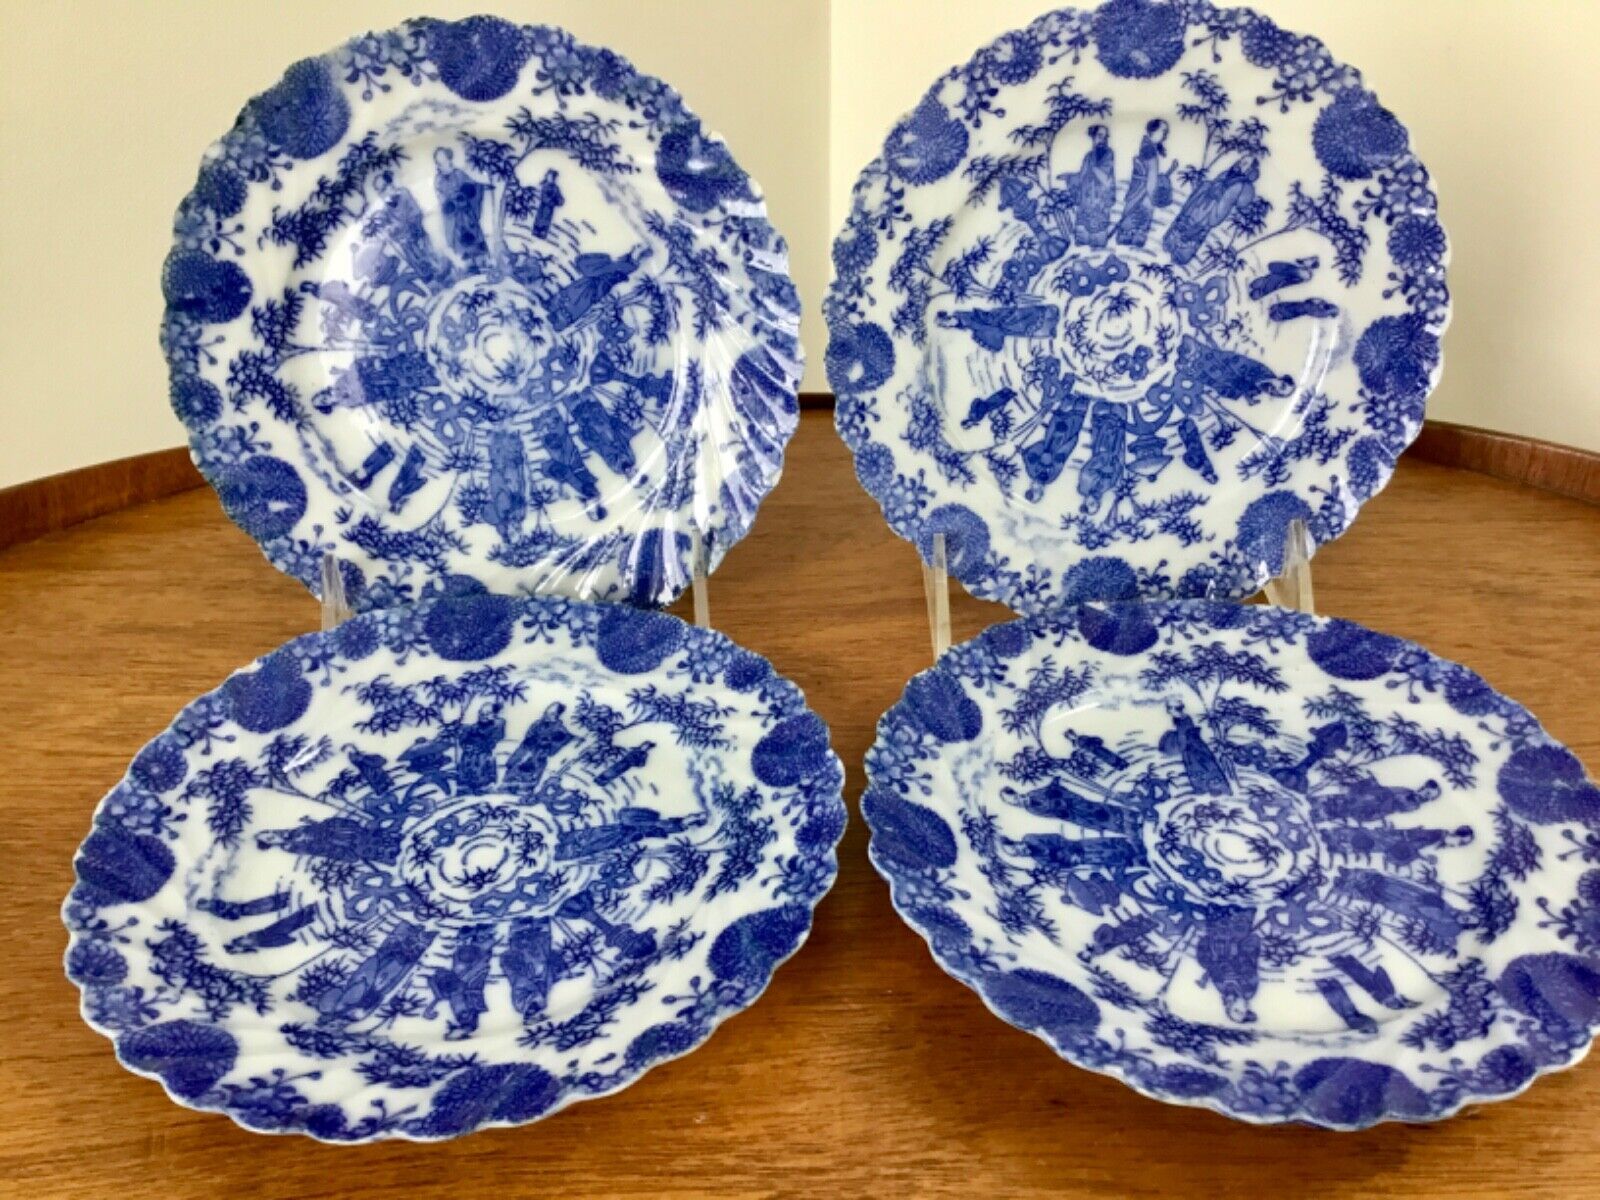  Antique Asian /Chines /Japanese 4 Blue & White Plates Decorated w Sages 6 1/4” Без бренда - фотография #12